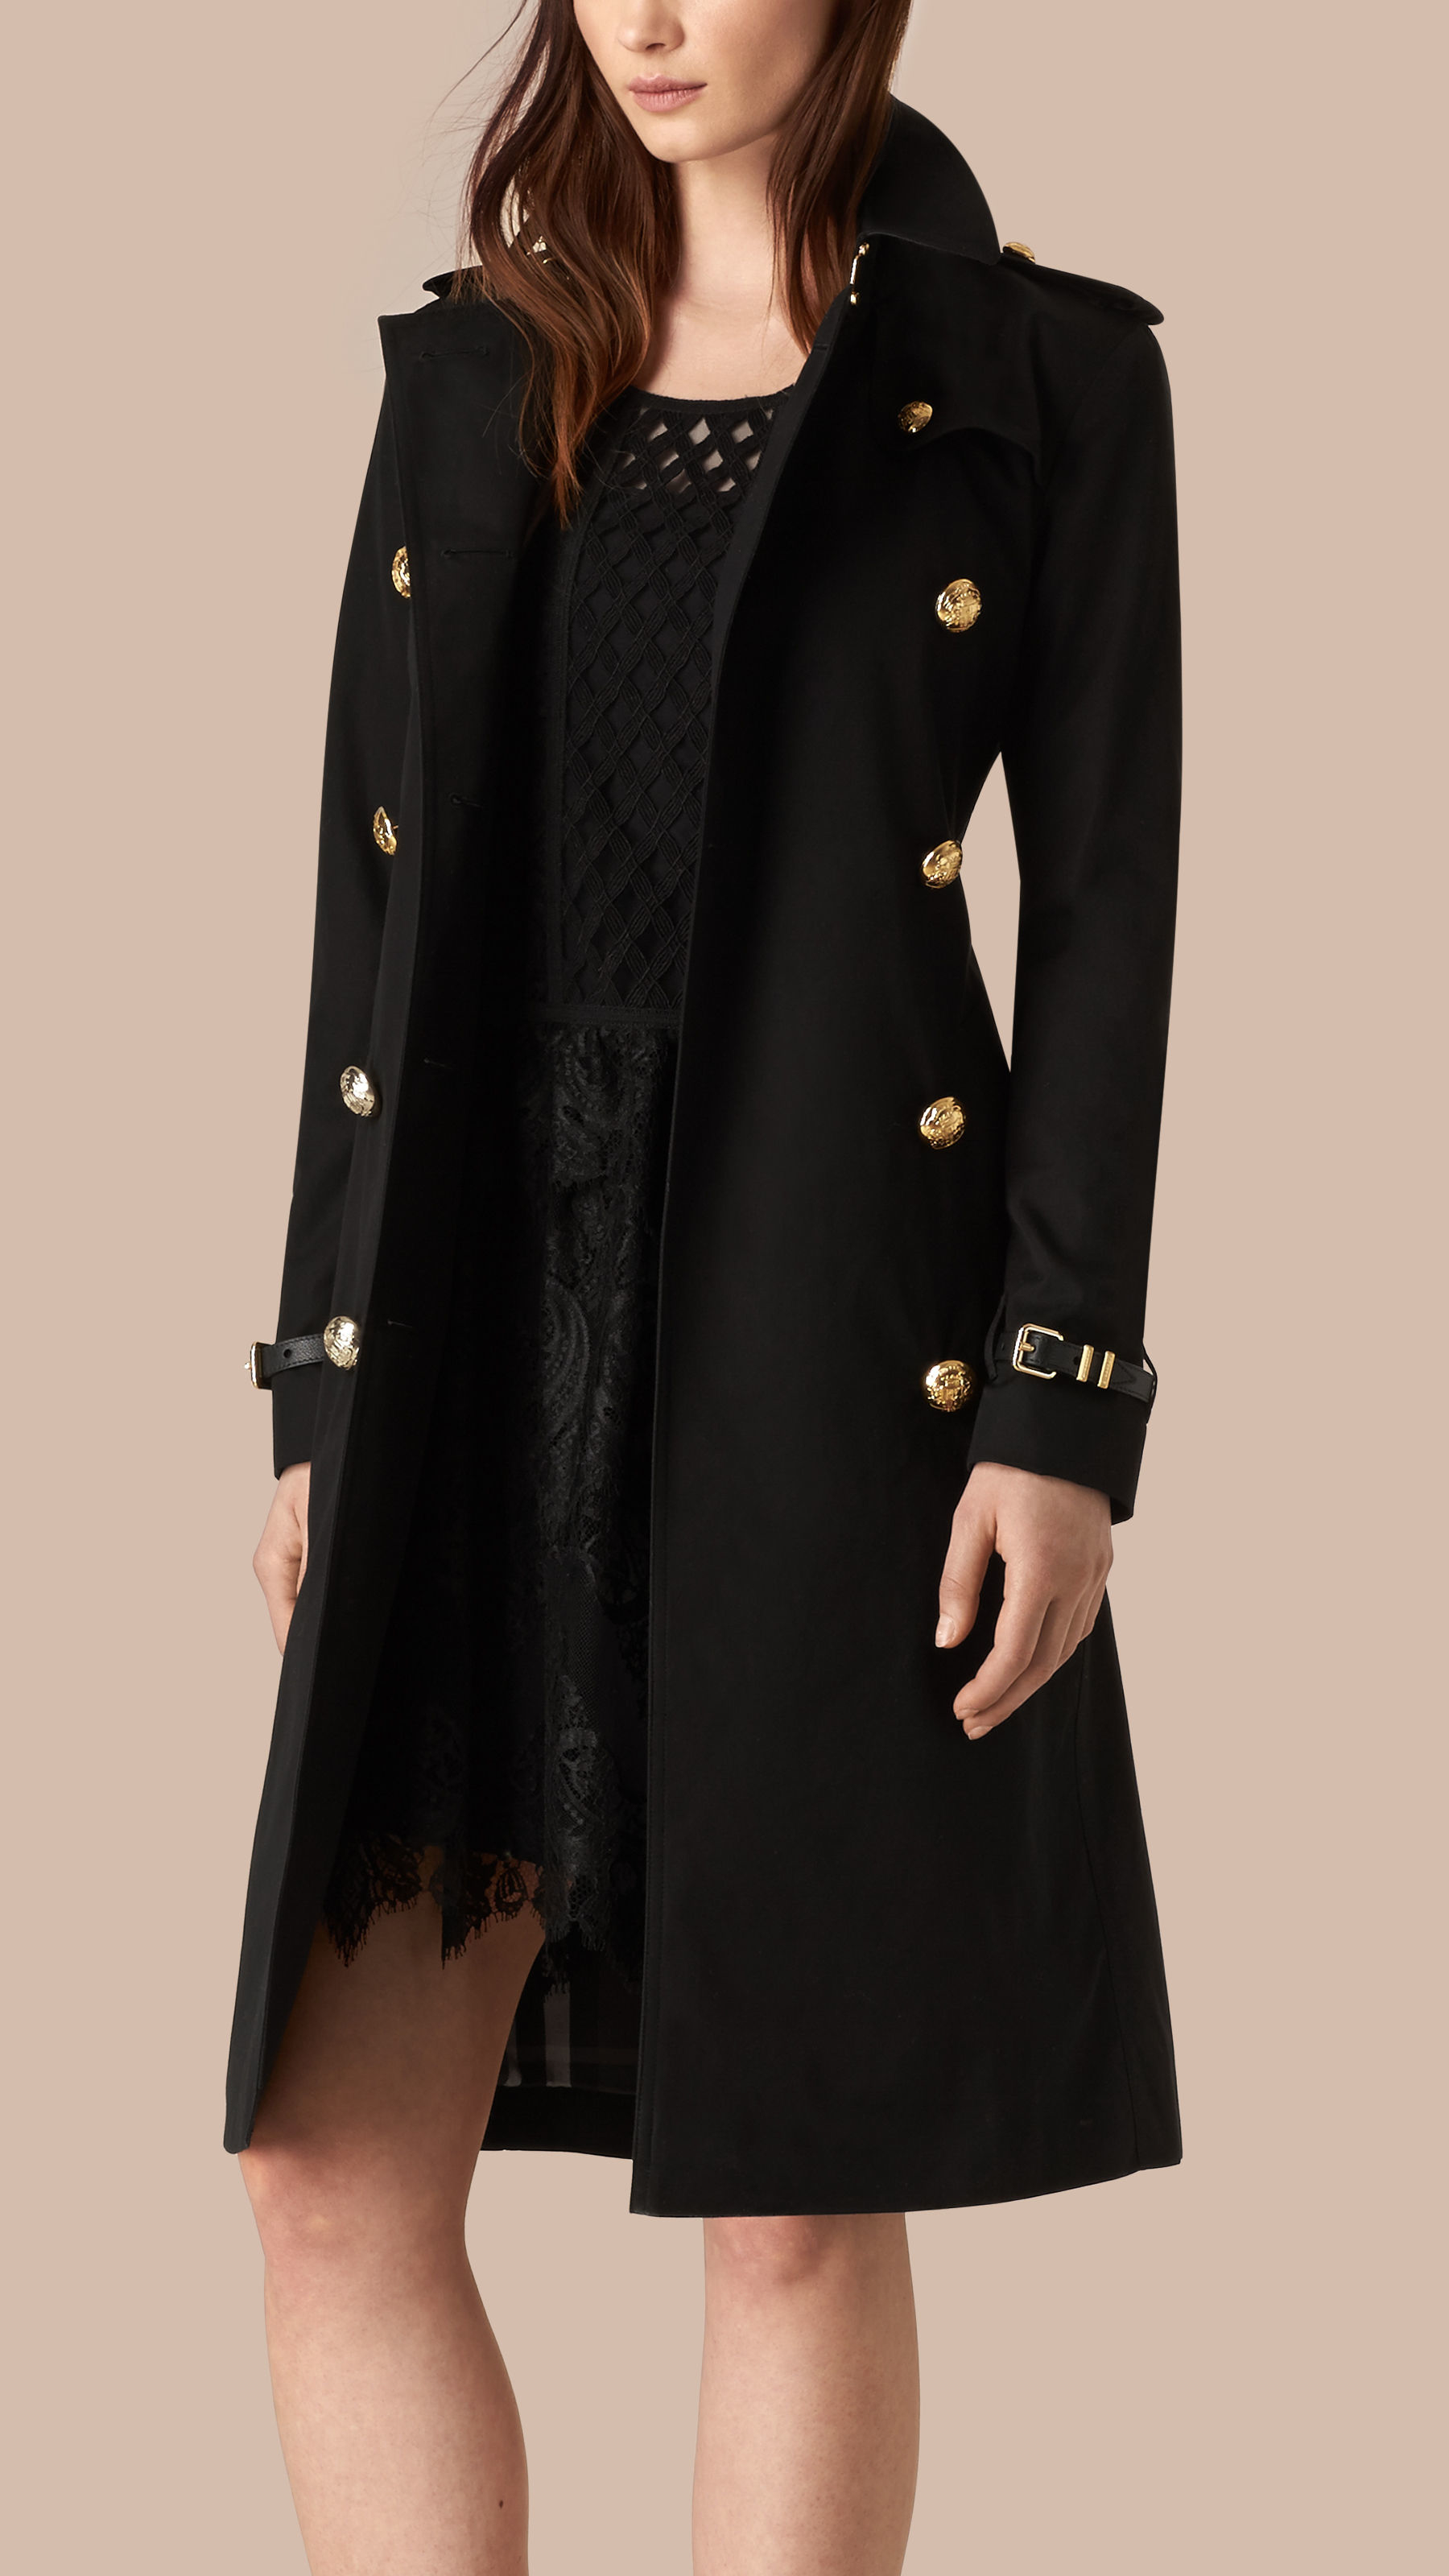 Burberry Military Button Cotton Gabardine Trench Coat in Black - Lyst